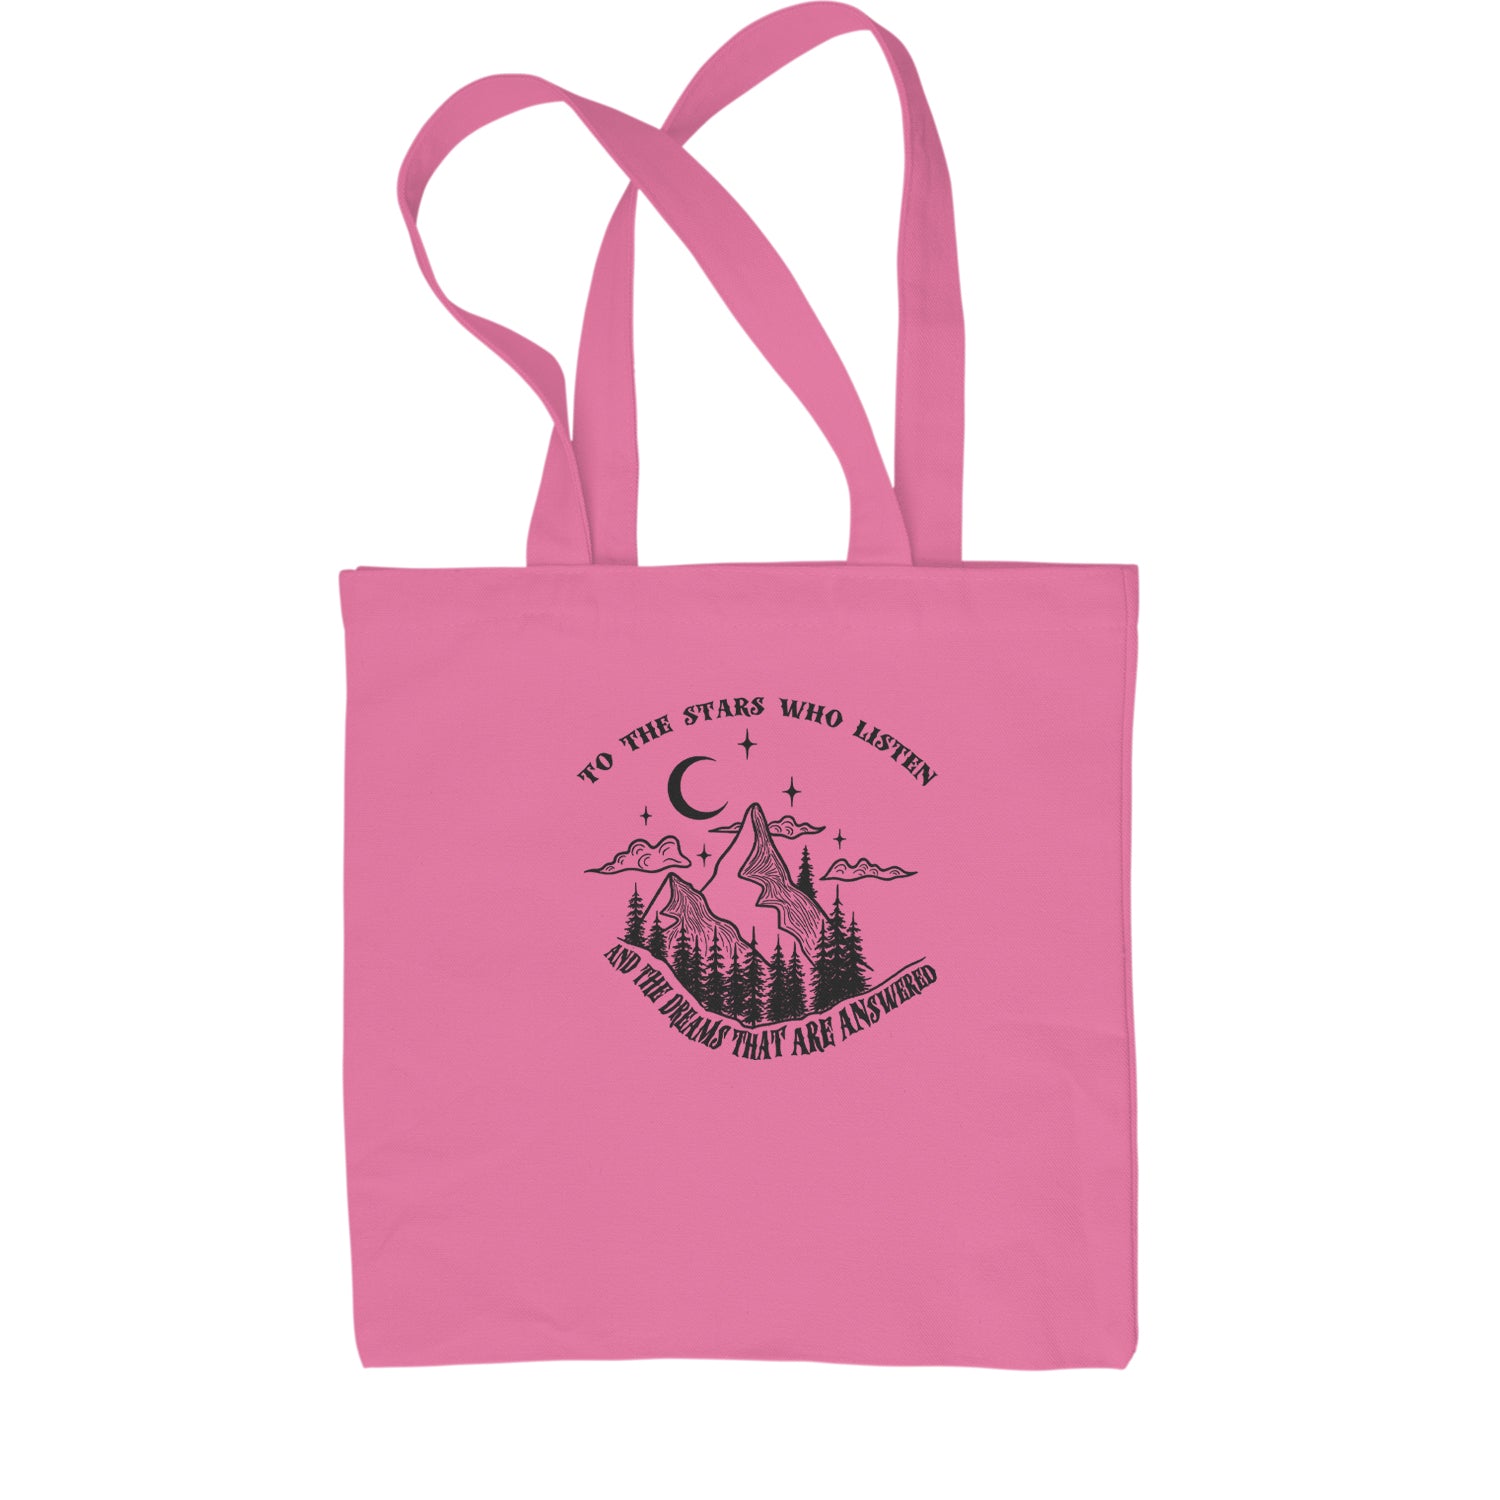 To The Stars Who Listen… ACOTAR Quote Shopping Tote Bag acotar, court, tamlin, thorns by Expression Tees